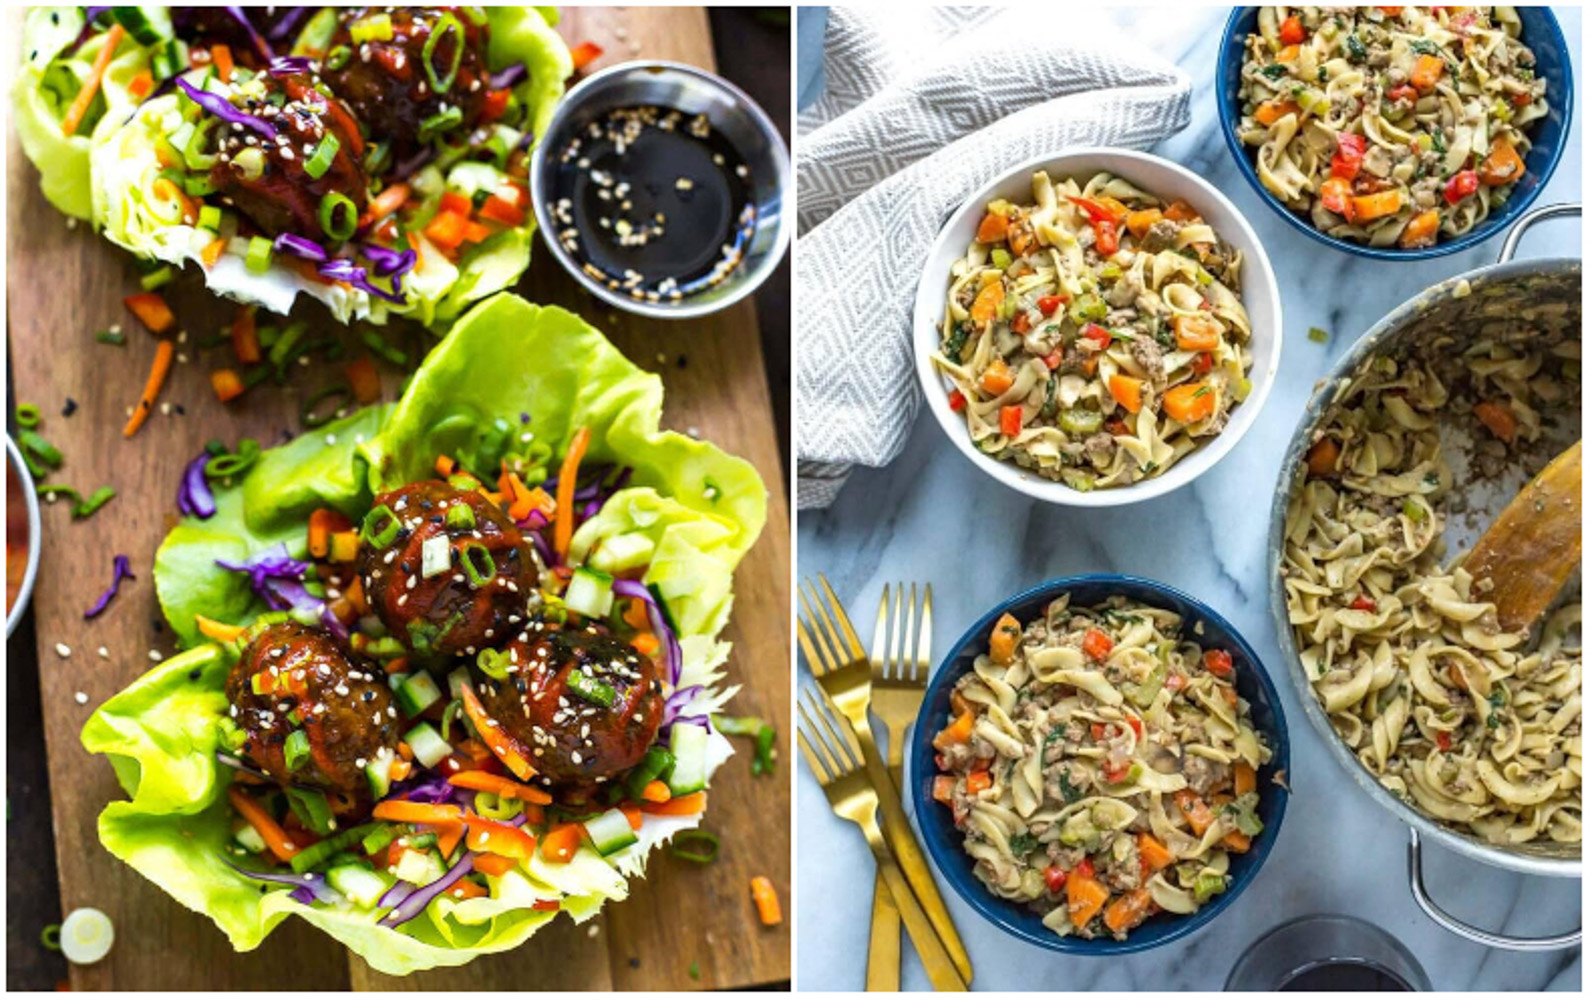 21+ Healthy Make Ahead Freezer Meals for Busy Weeknights